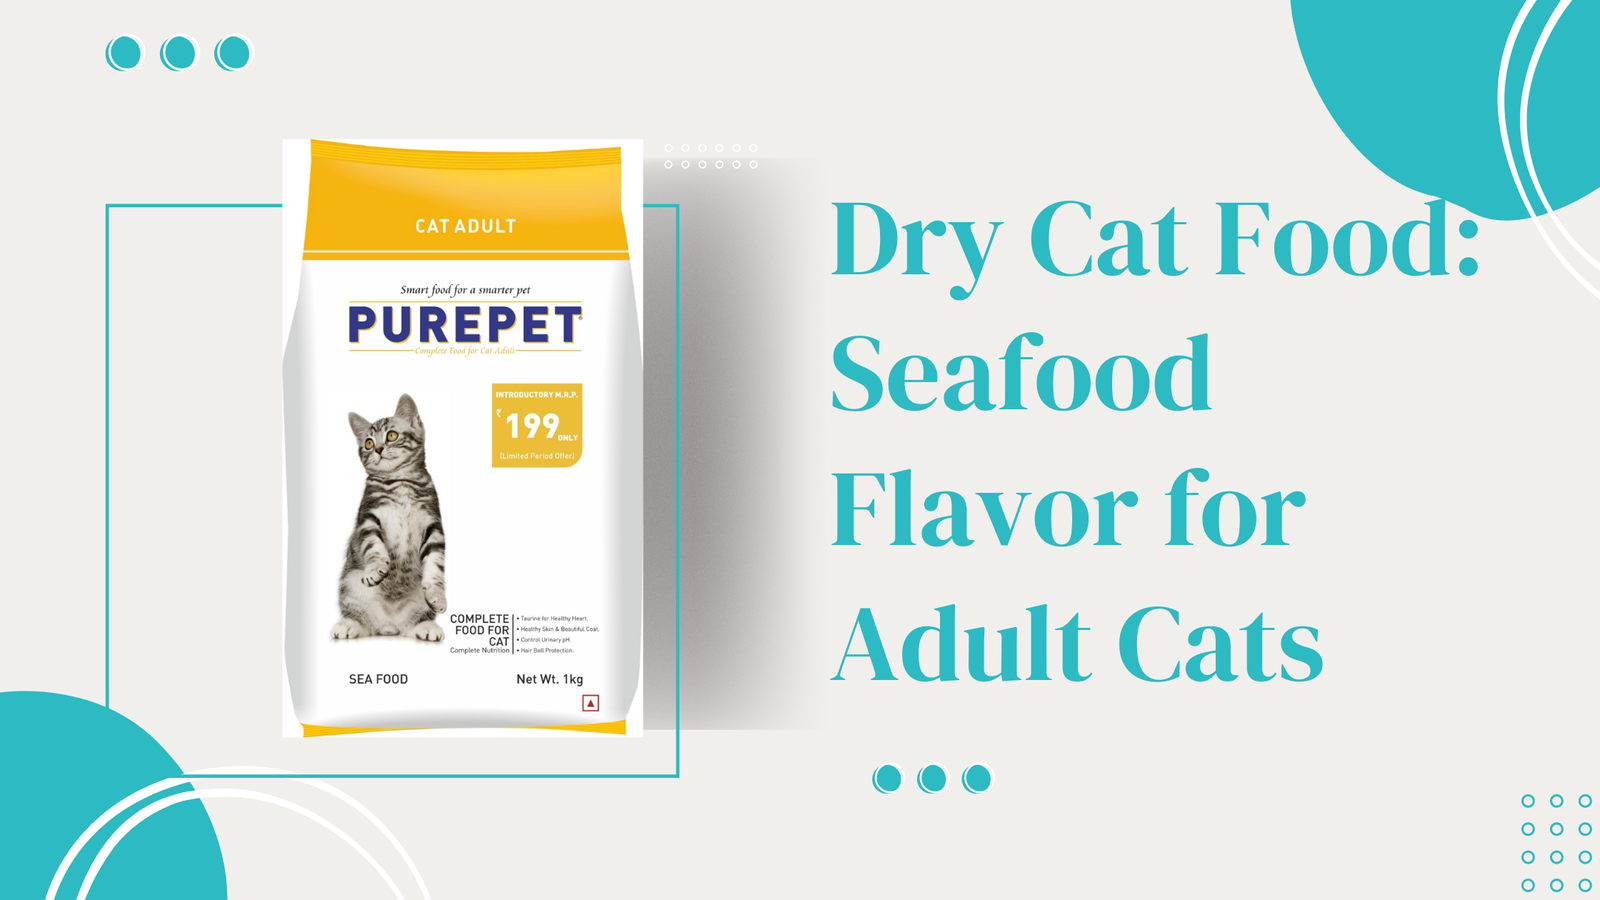 Dry Cat Food: Nutritious Seafood Flavor for Adult Cats